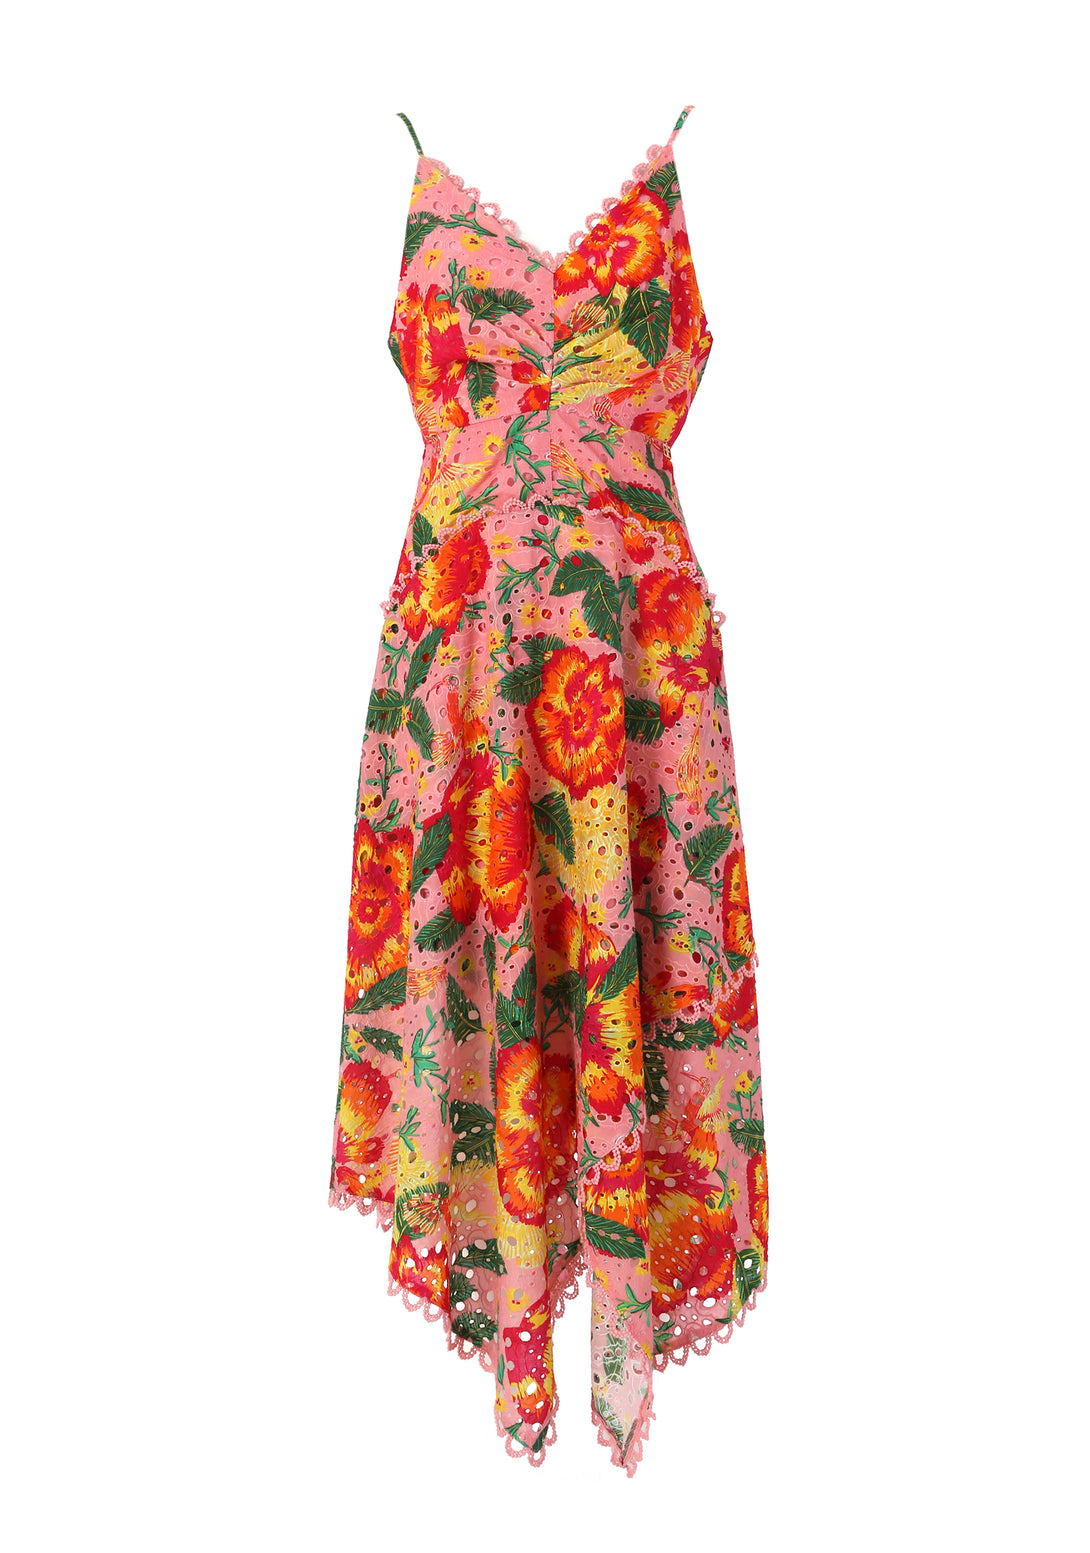 Sleeveless dress regular fit middle length with flowery pattern